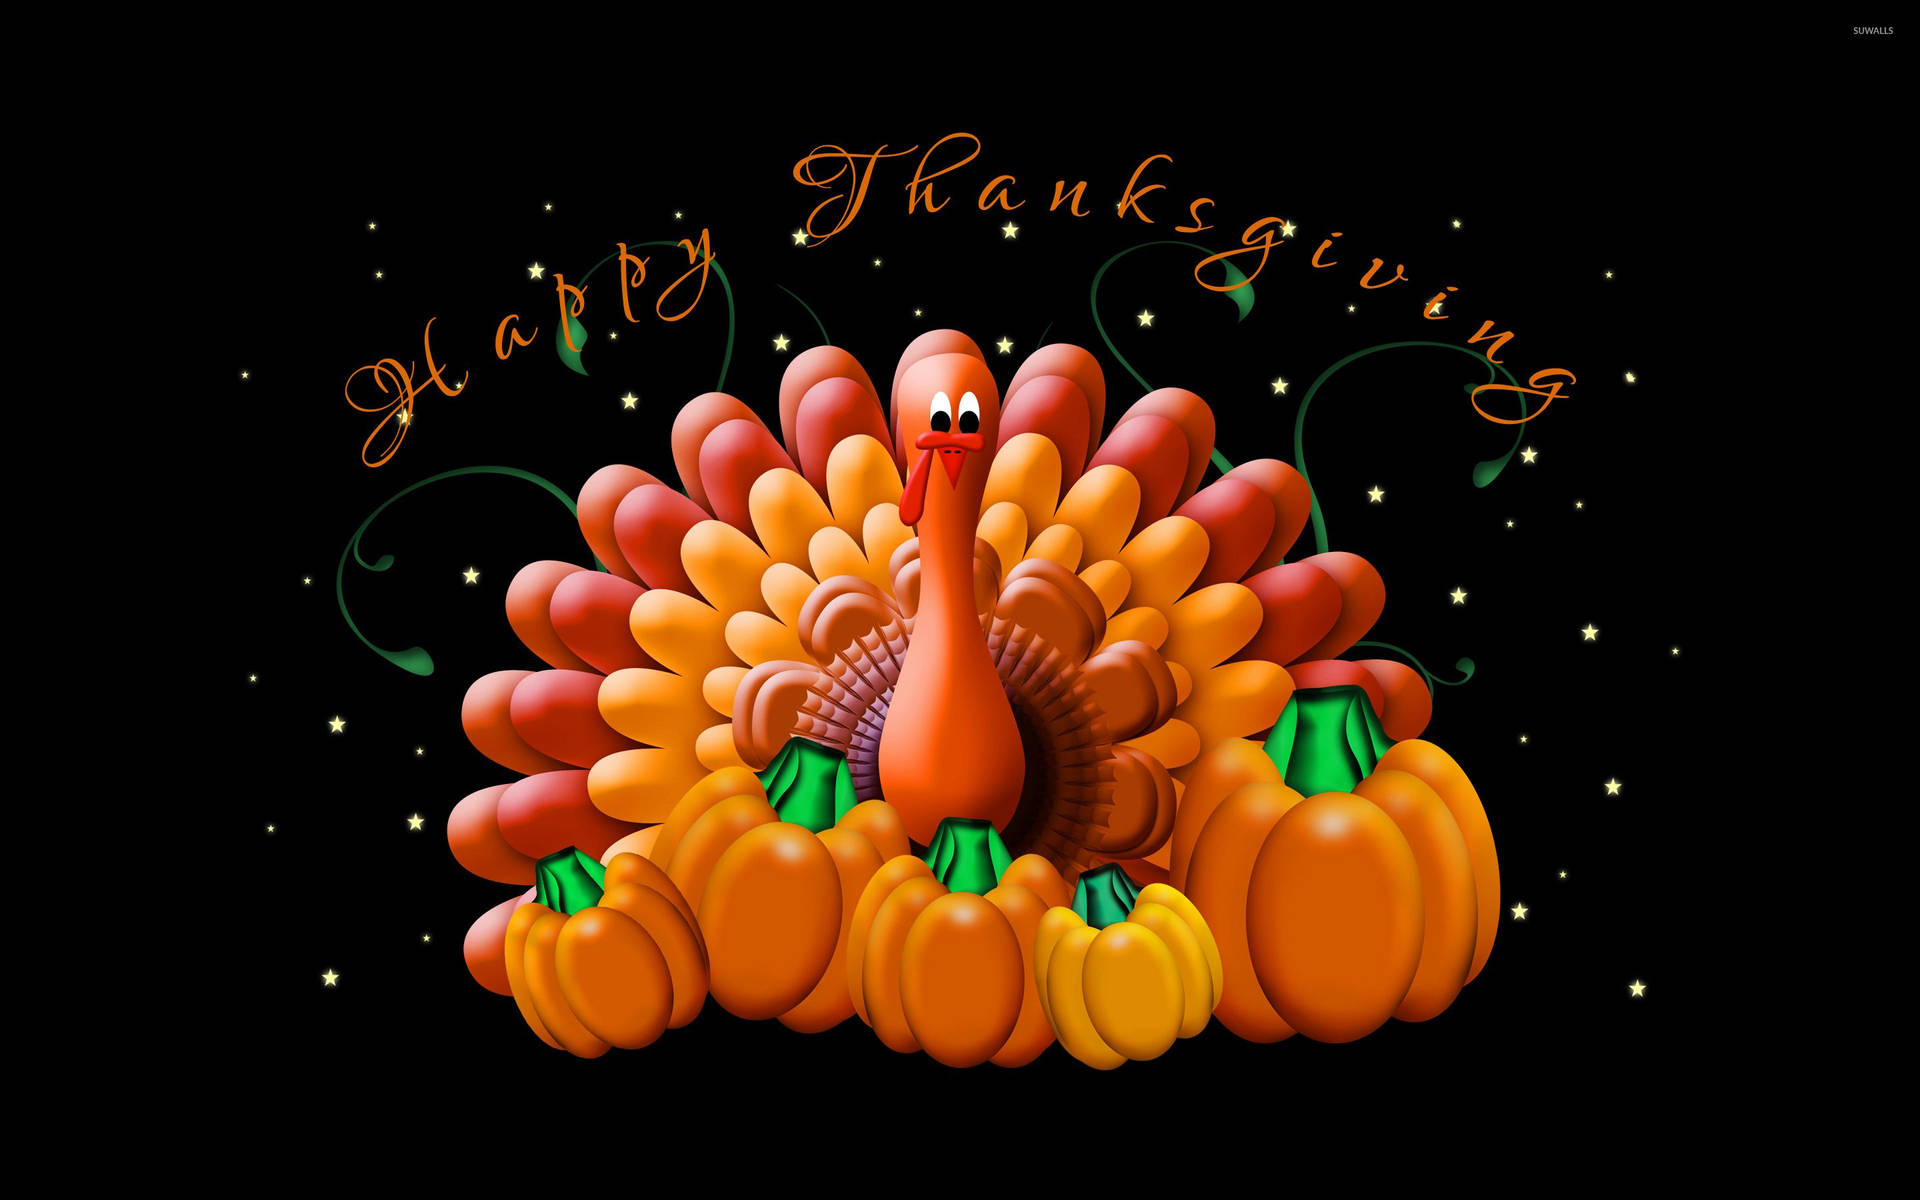 Celebrate Thanksgiving with this Smiling Turkey! Wallpaper